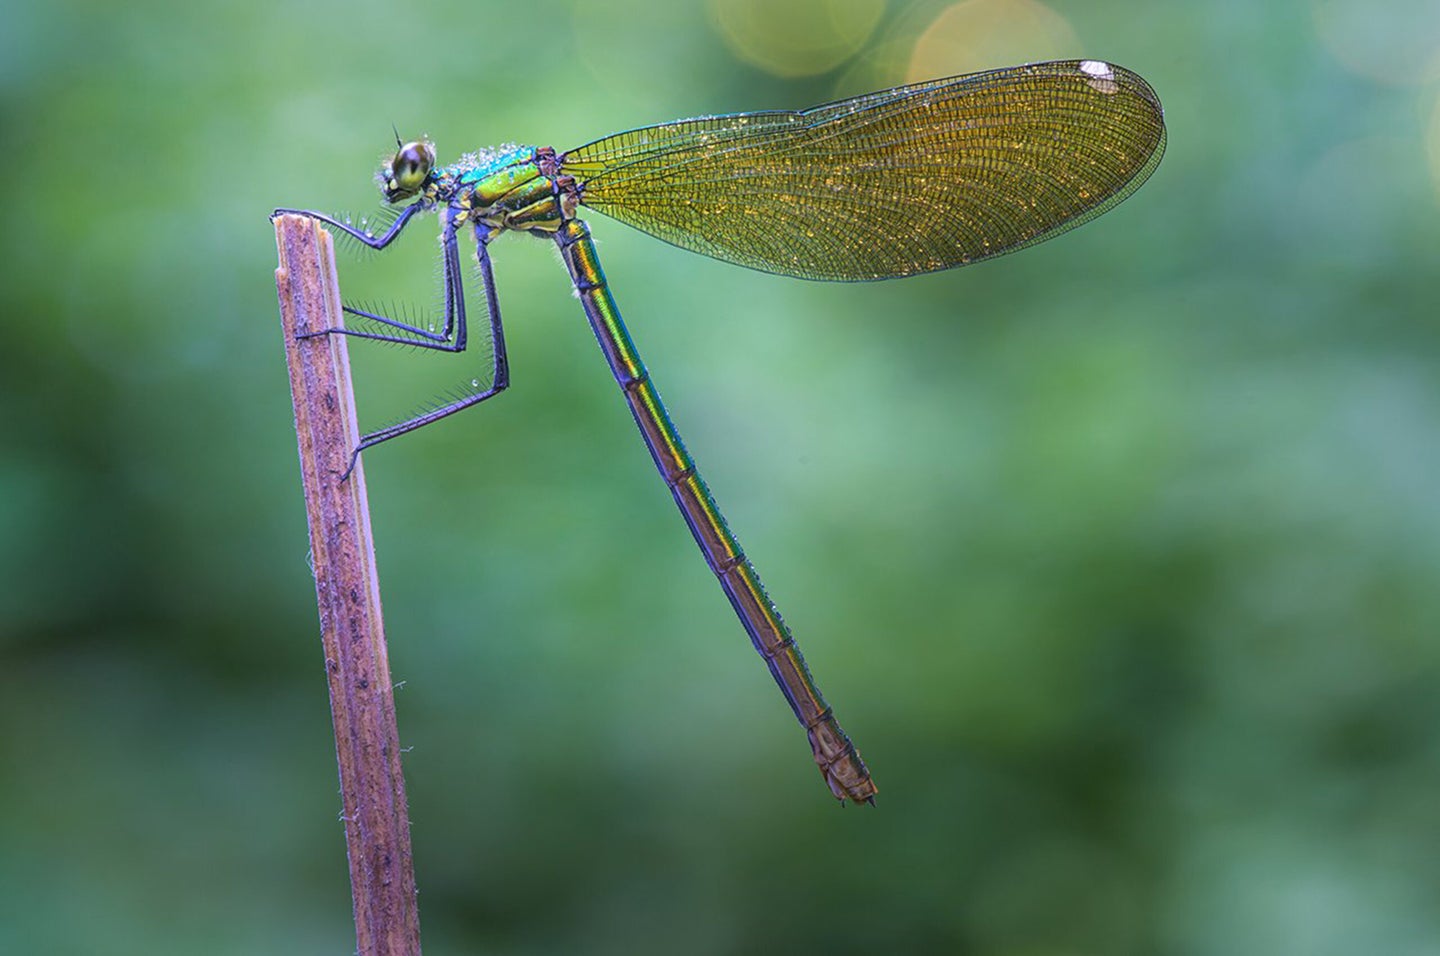 A dragonfly on a purple branch